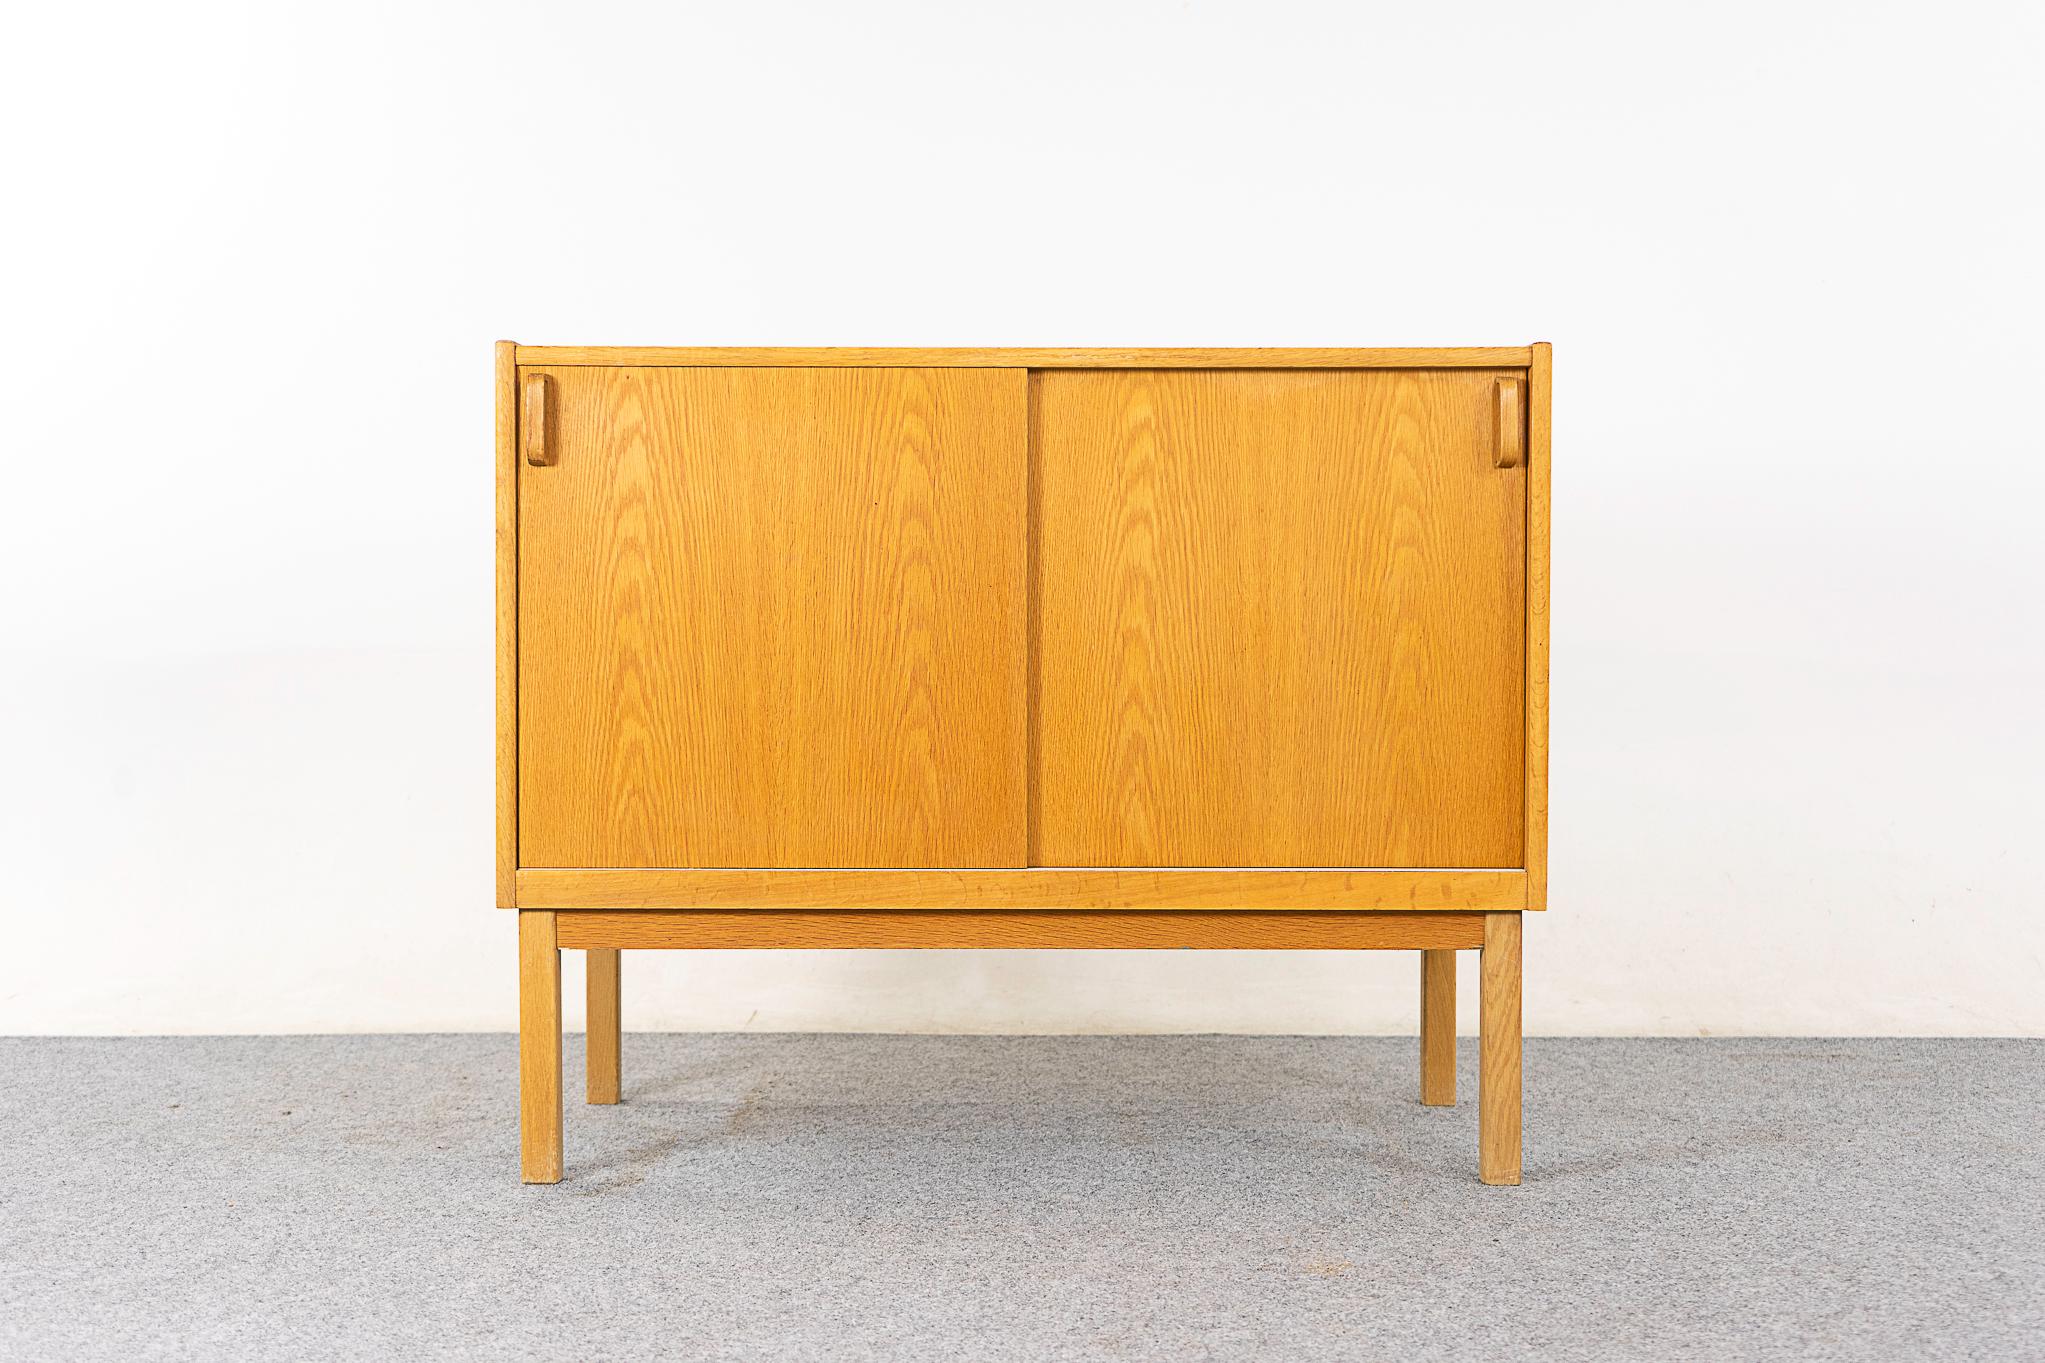 Oak Scandinavian cabinet, circa 1960's. Clean, simple lined design with book-matched veneer. Sliding doors open to a fixed shelf. Lovely practicle size! 

Unrestored item with option to purchase in restored condition for an additional $150 USD.